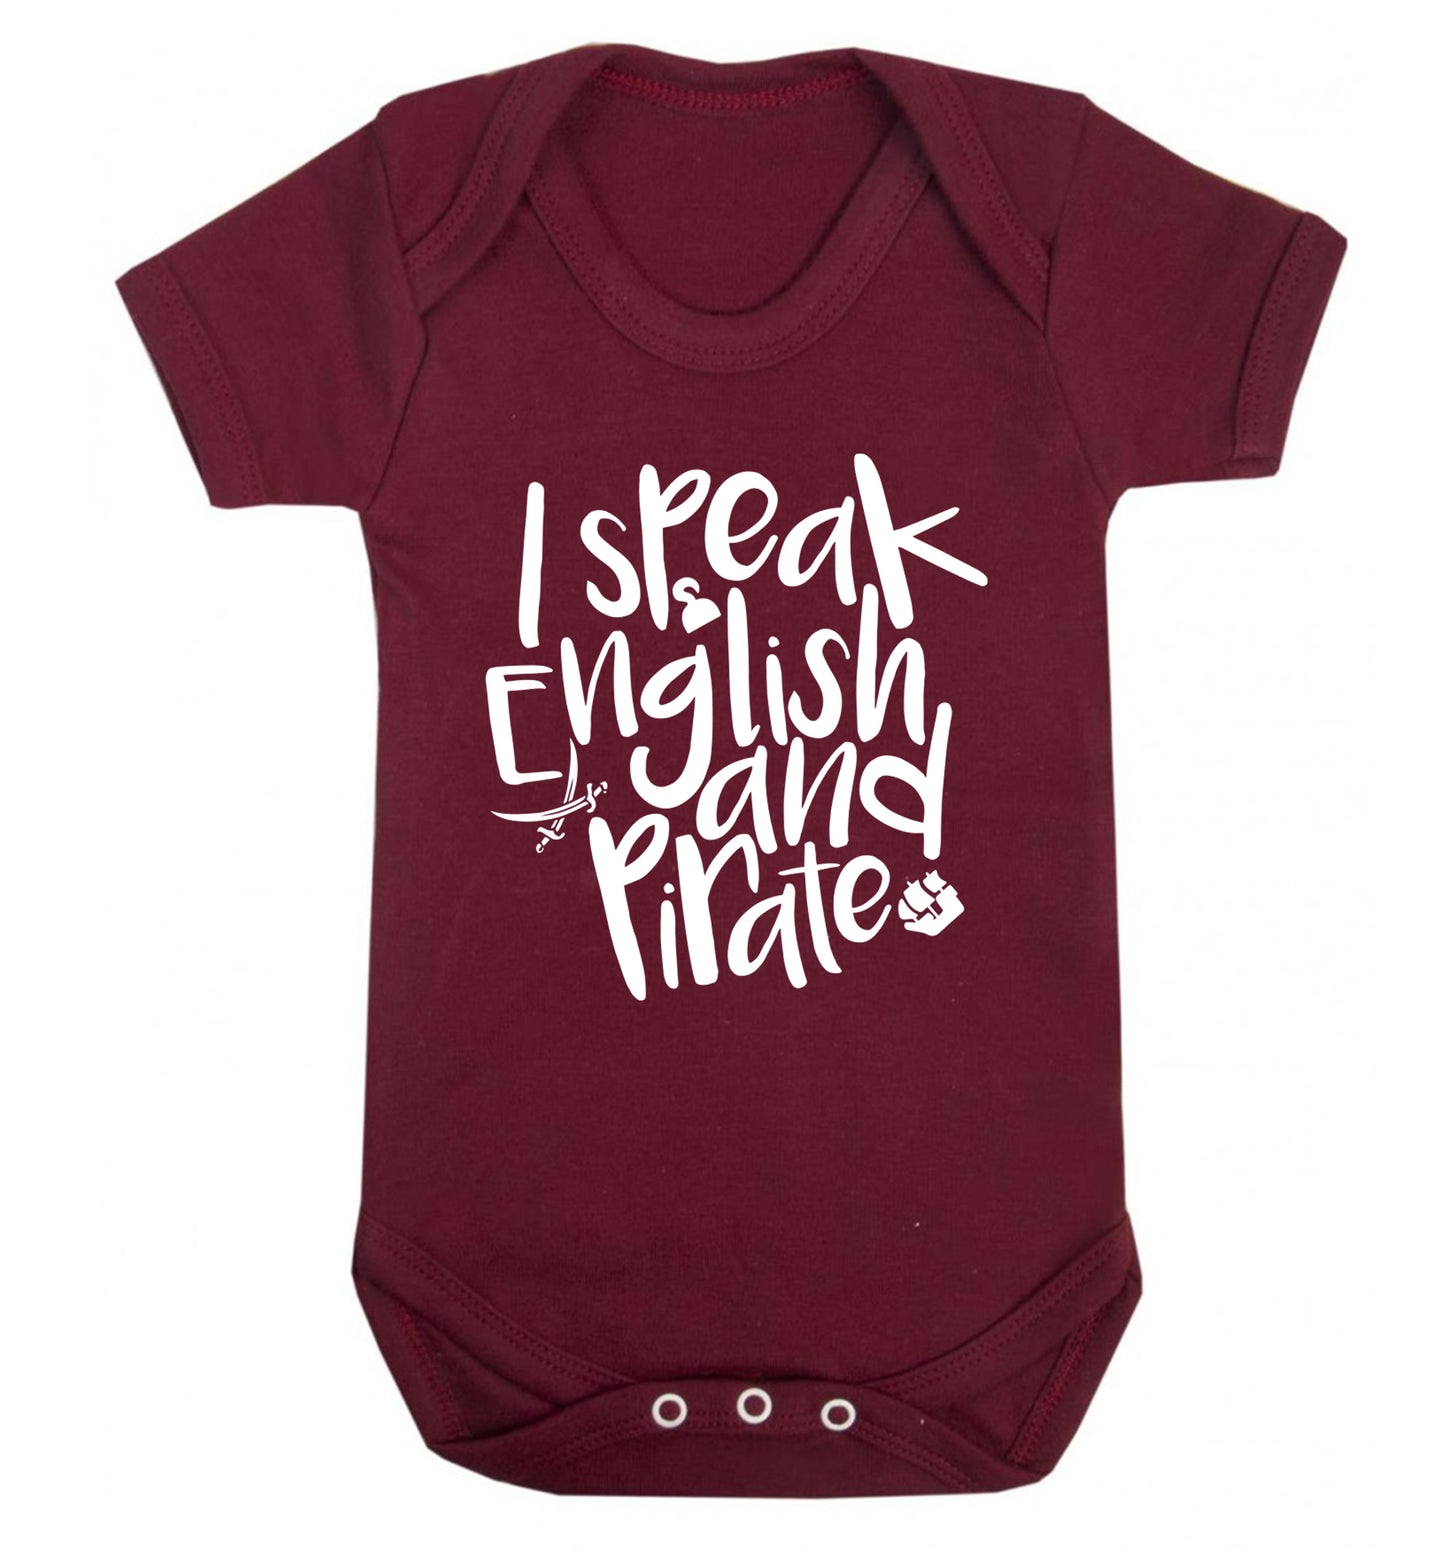 I speak English and pirate Baby Vest maroon 18-24 months